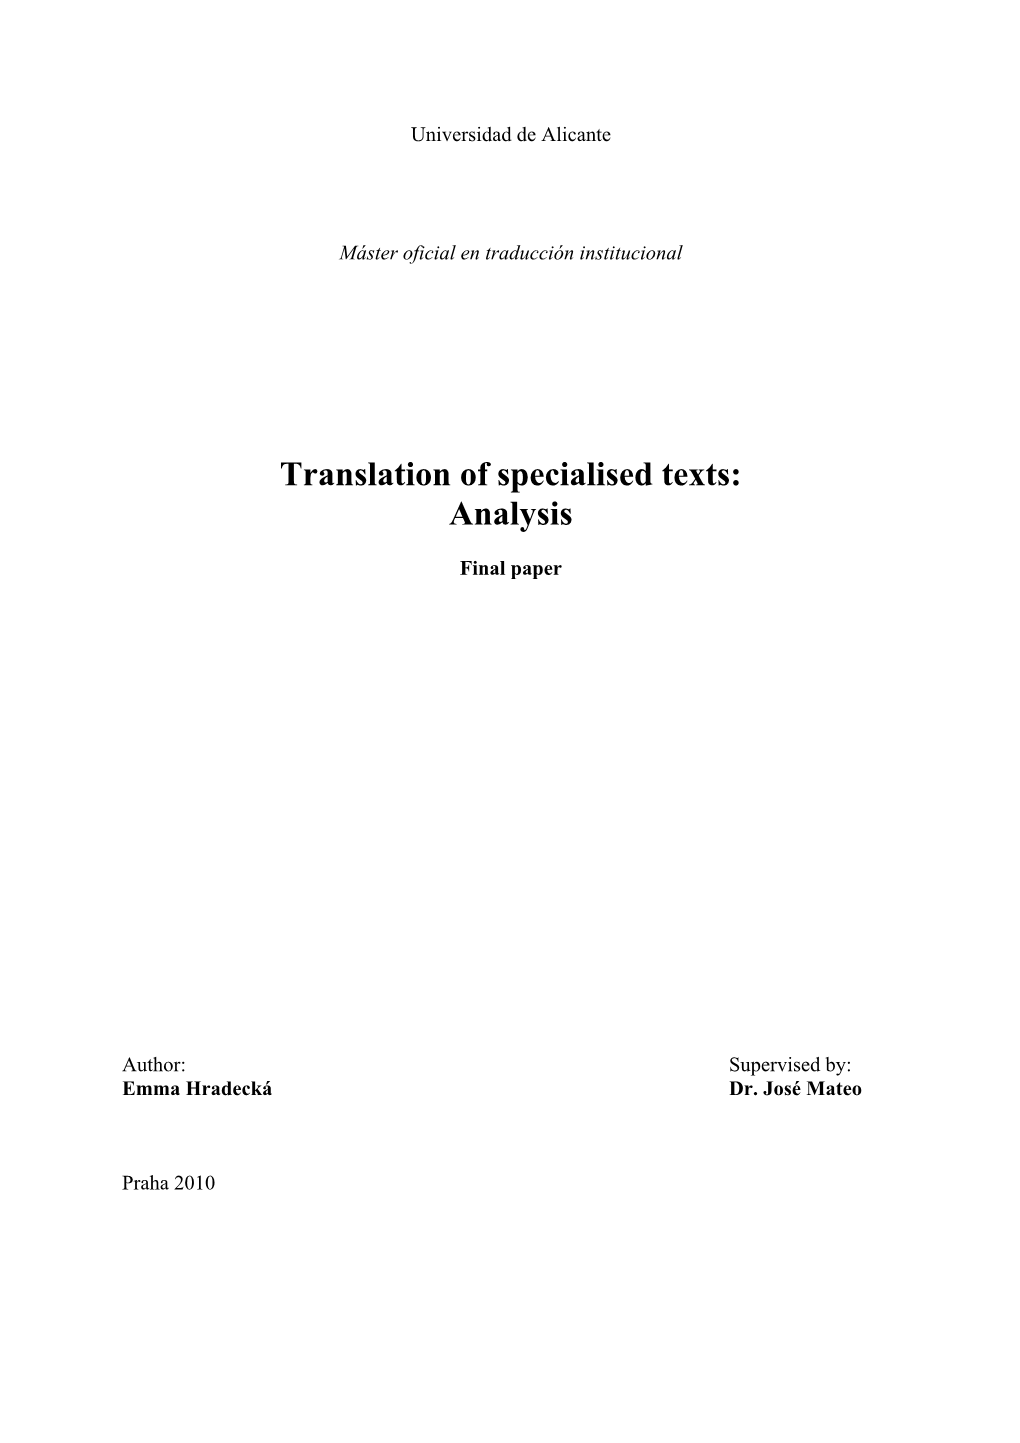 Translation of Specialised Texts: Analysis